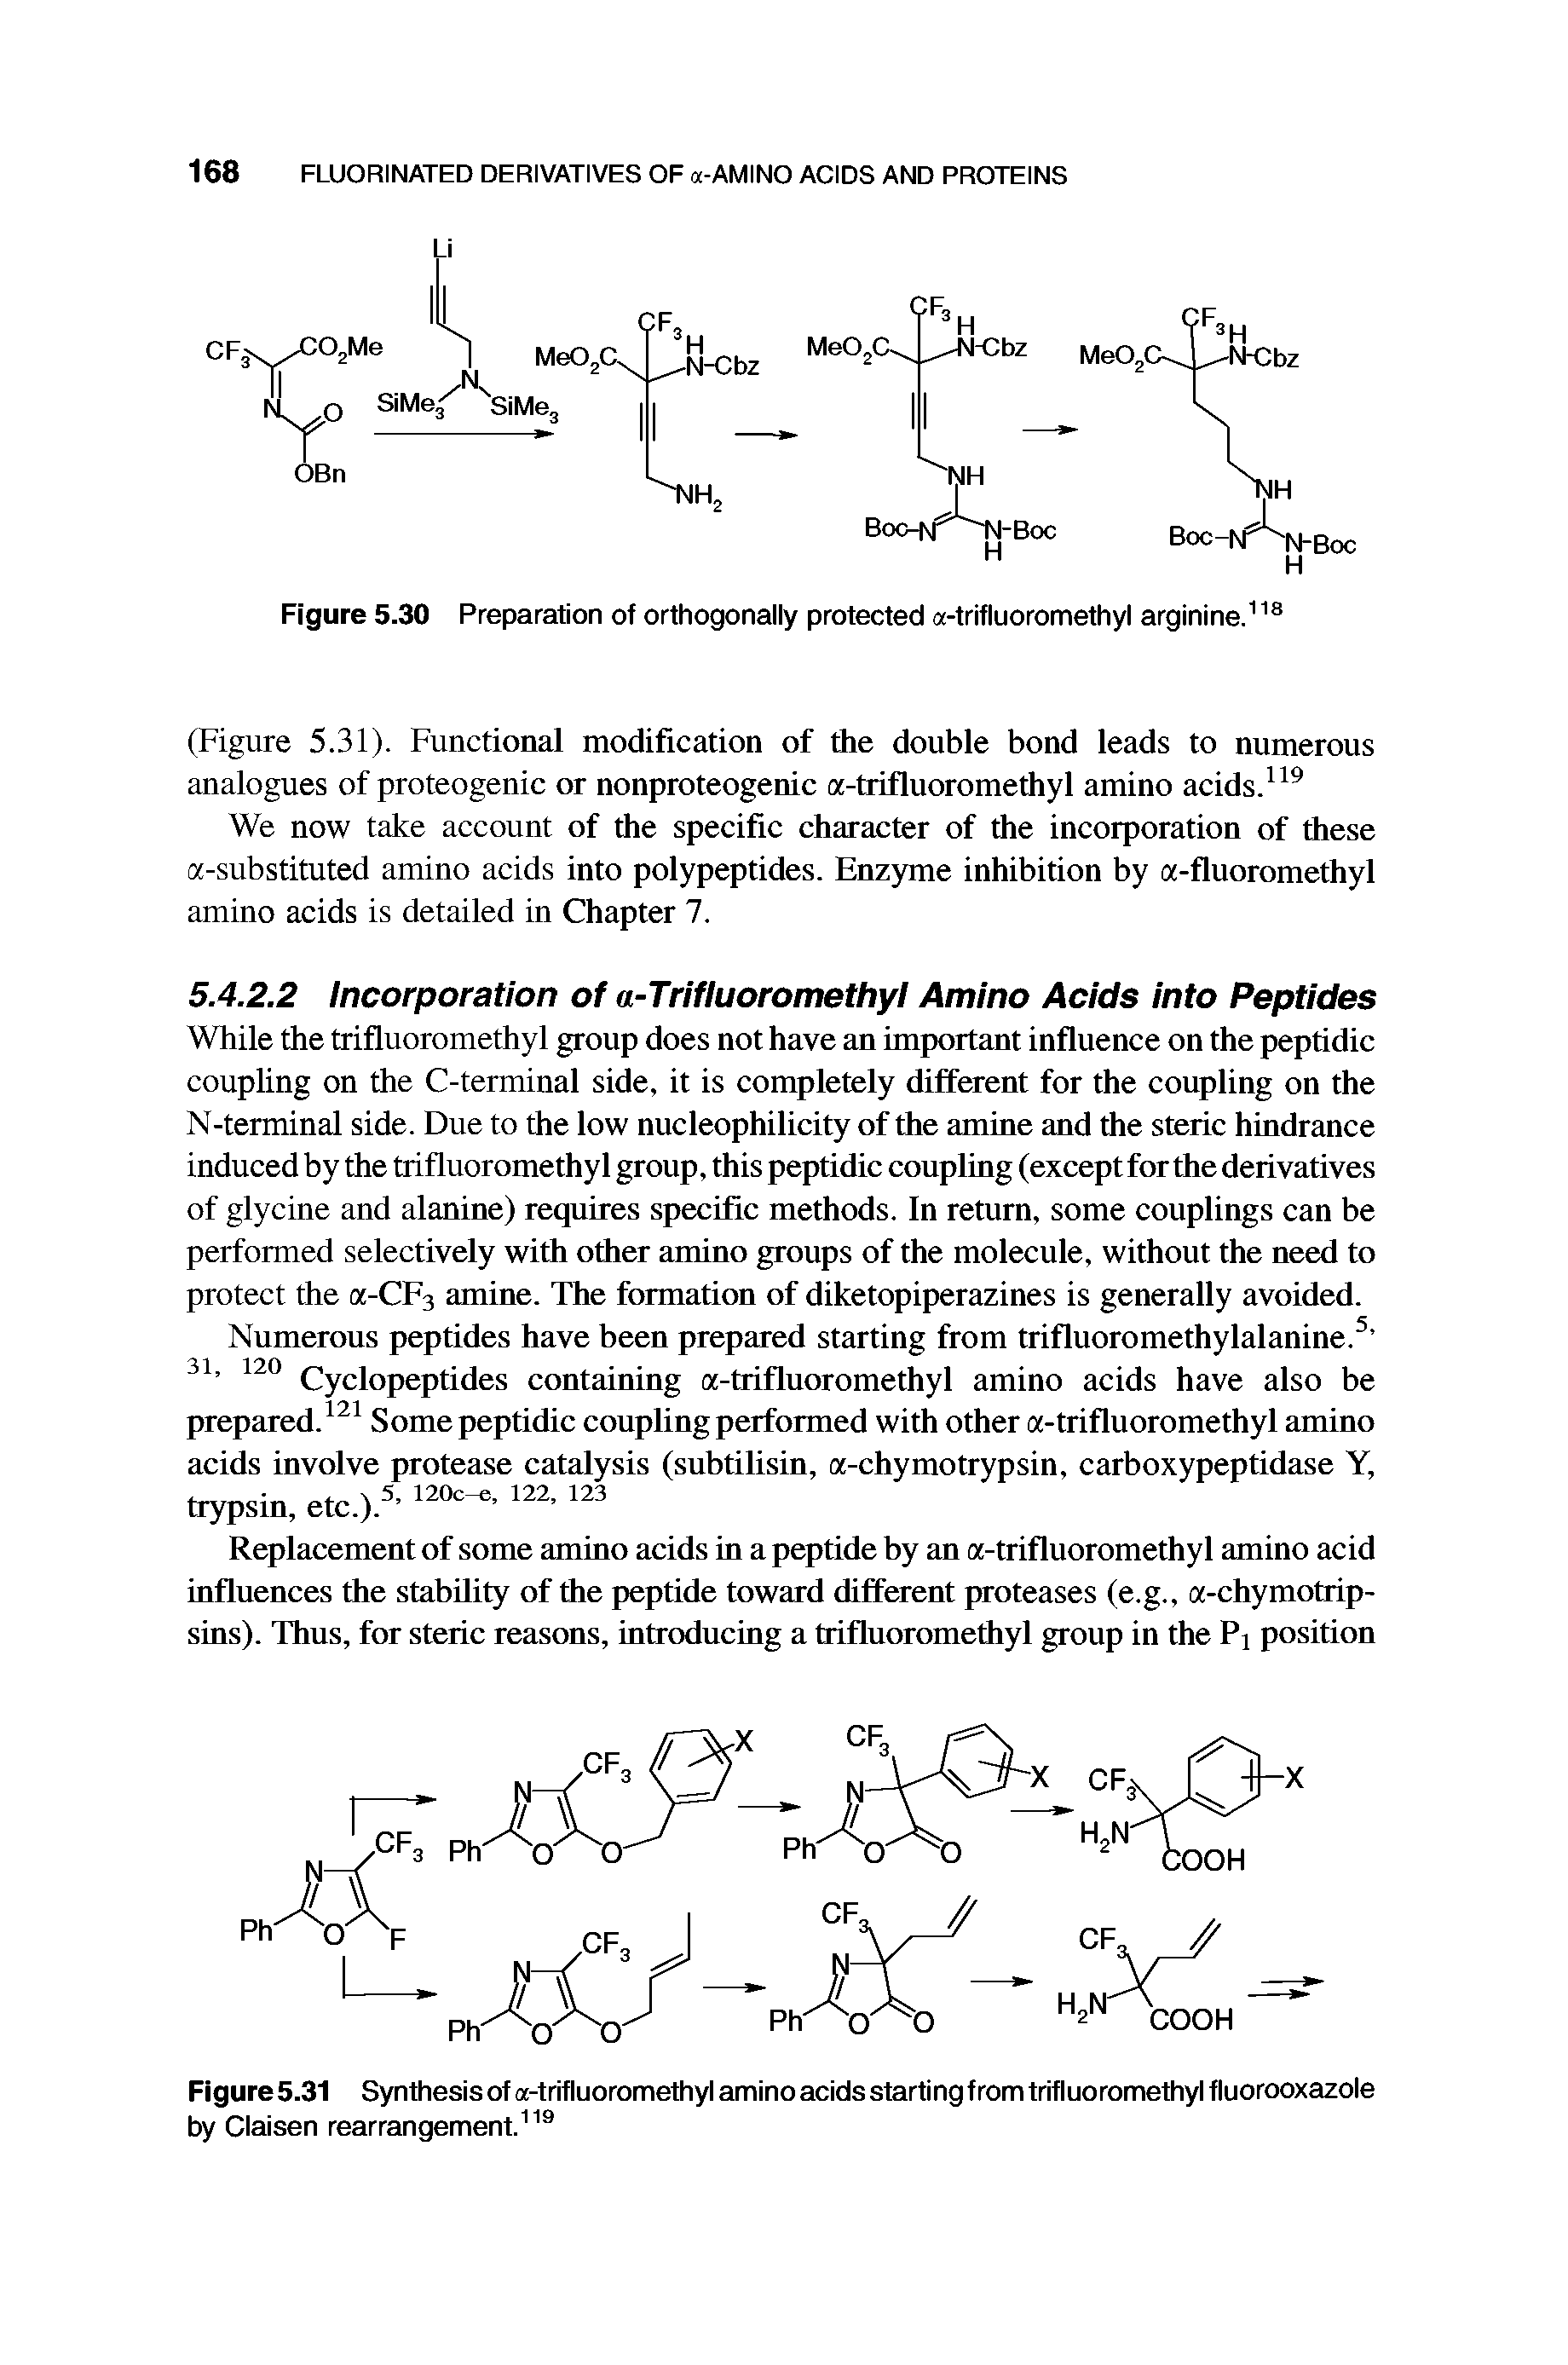 Figure5.31 Synthesis of a-trifluoromethyl amino acids starting from trifluoromethyl fluorooxazole by Claisen rearrangement. ...